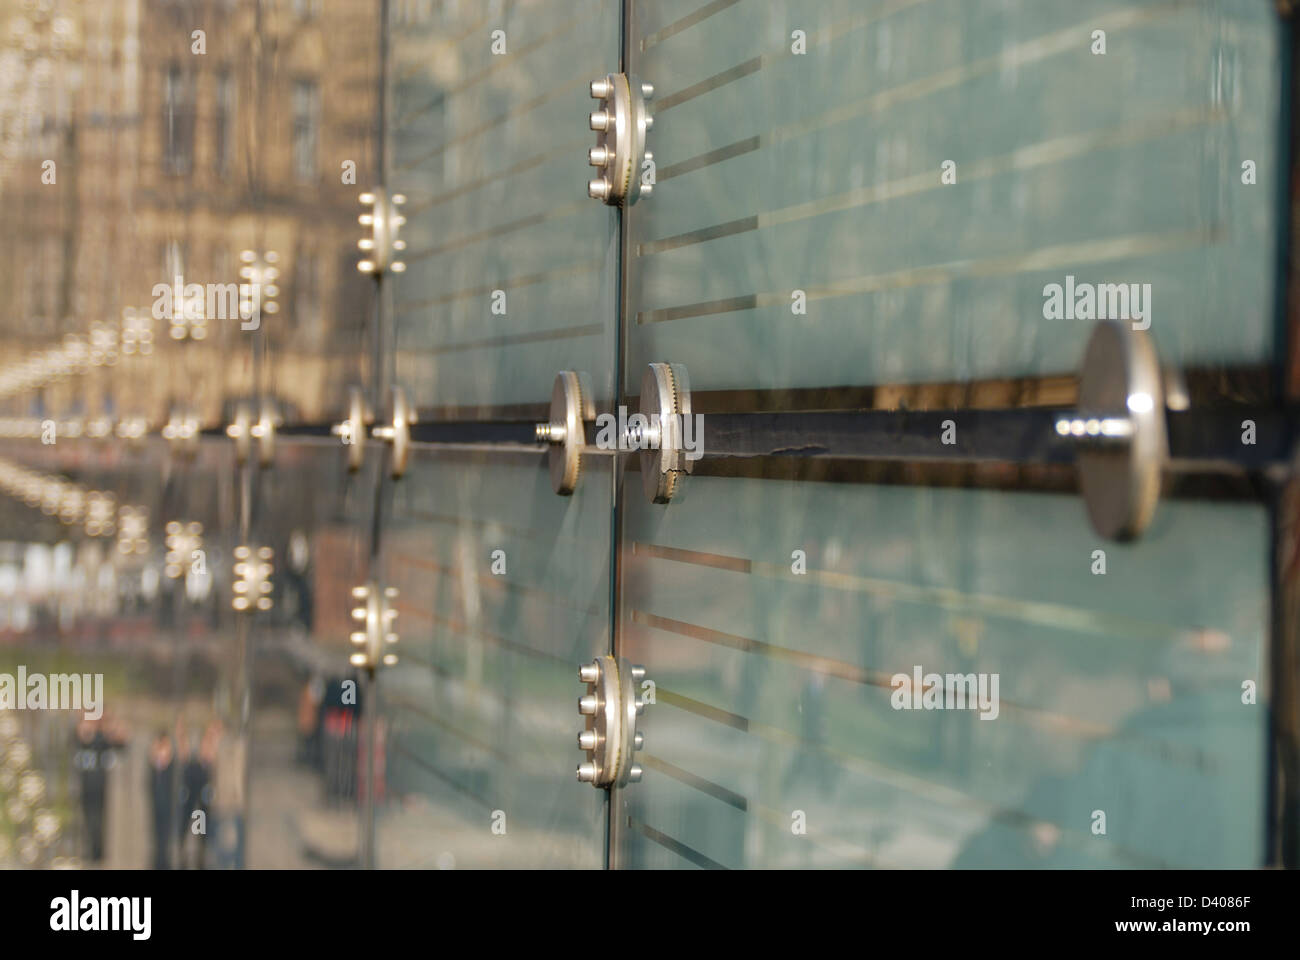 Plate glass fittings and reflections on the Urbis building, Manchester. Stock Photo